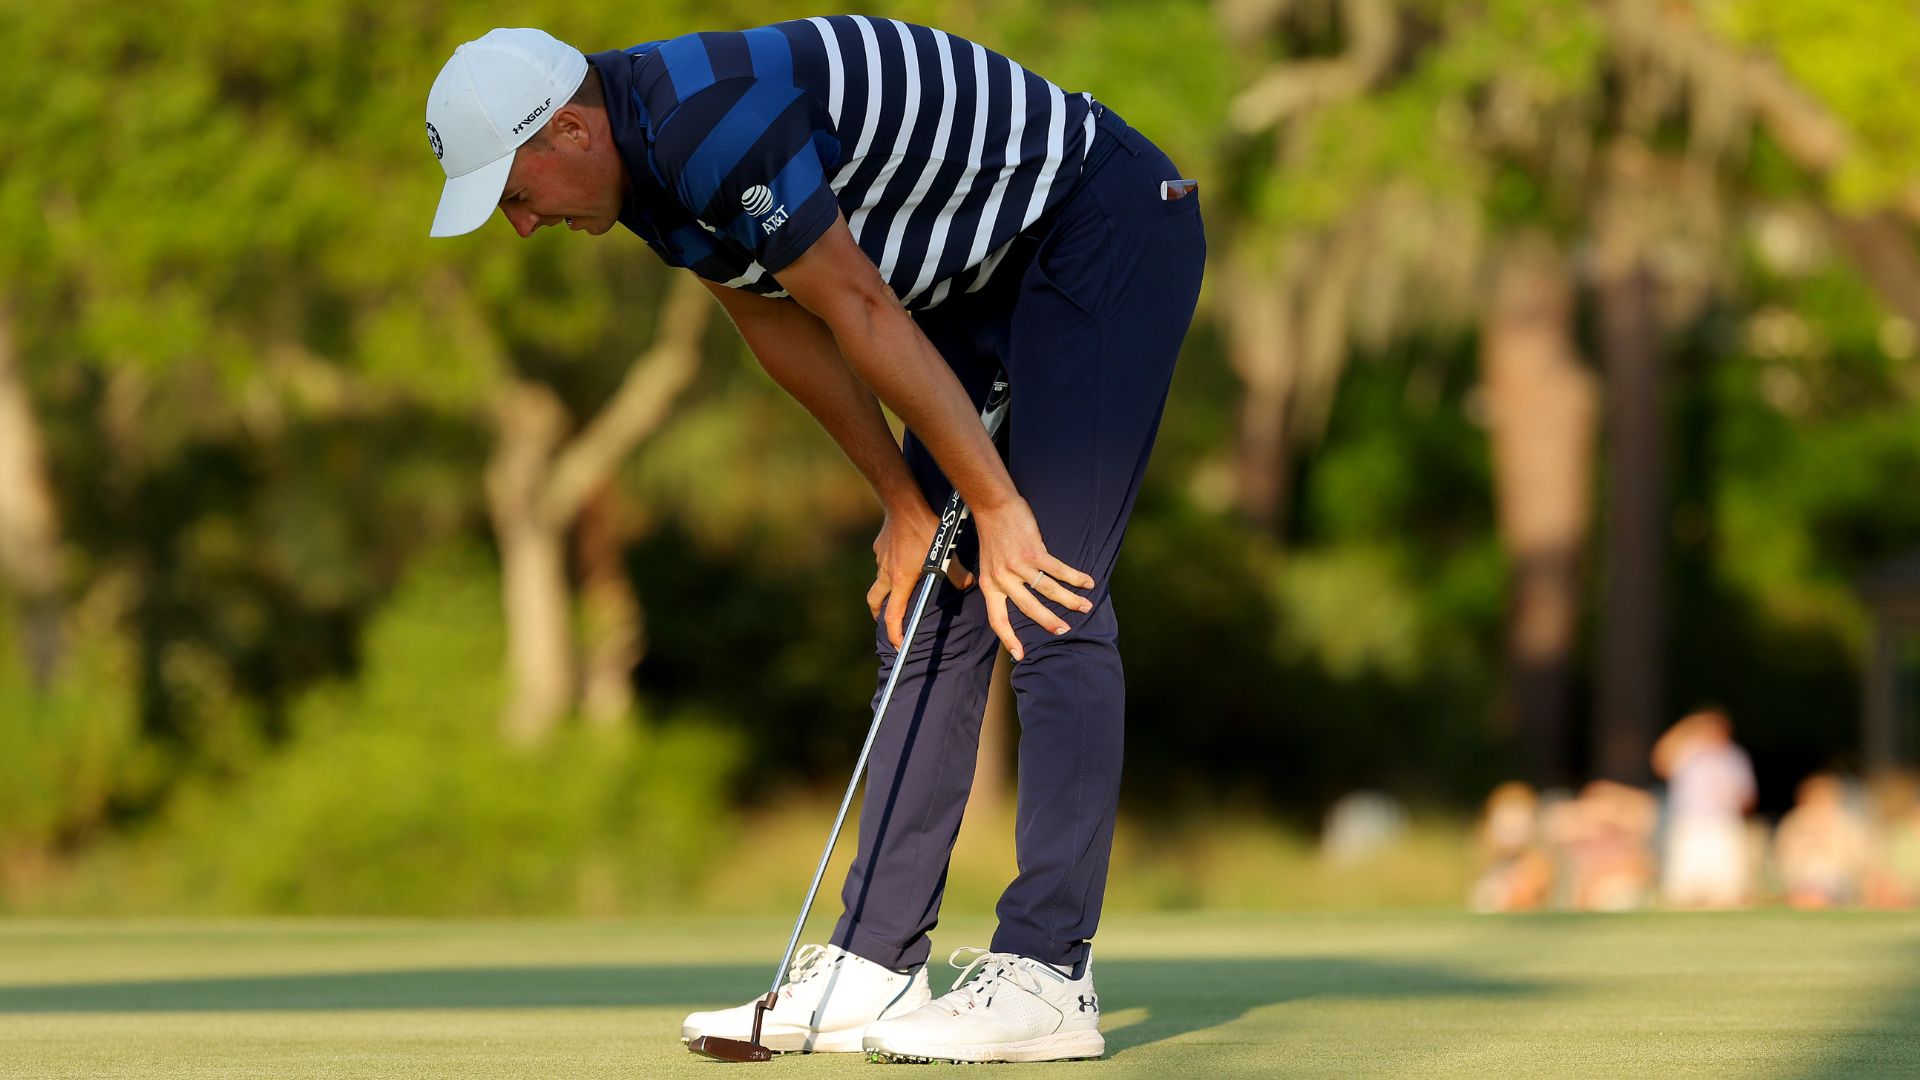 In RBC Heritage playoff, Jordan Spieth experience provides another brutal close call